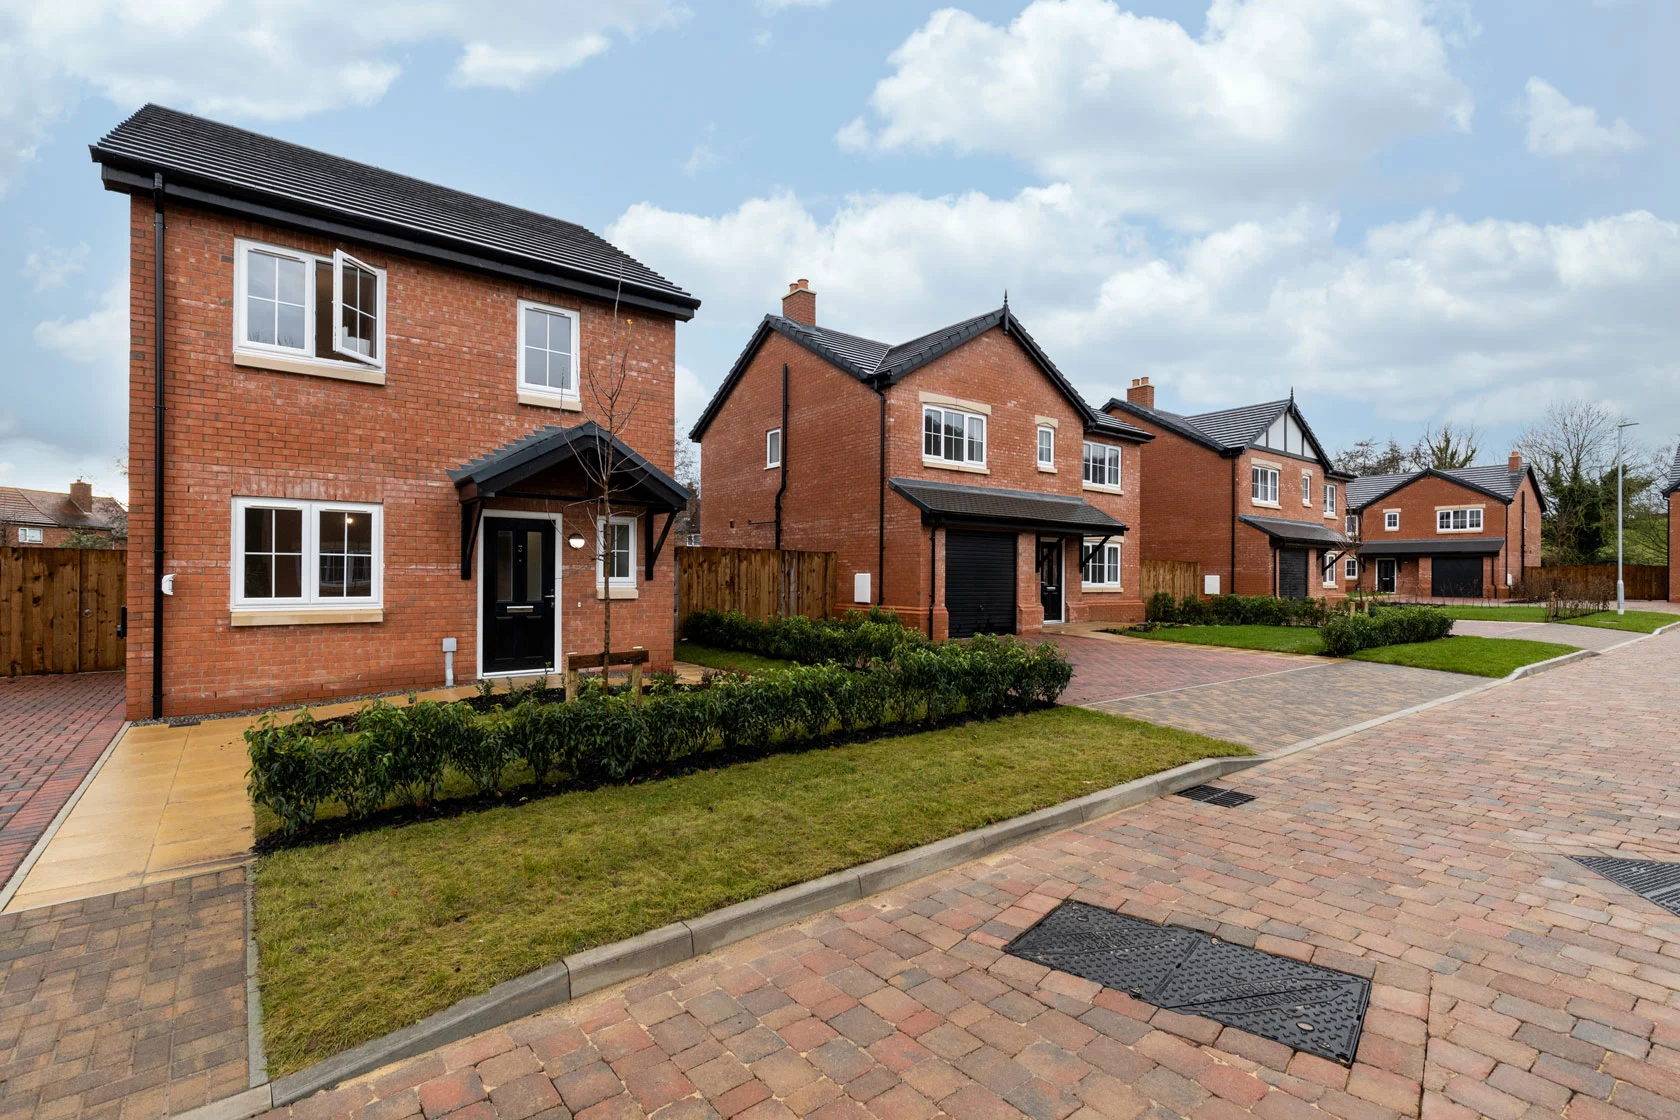 Showcase of a row of newly built detached homes